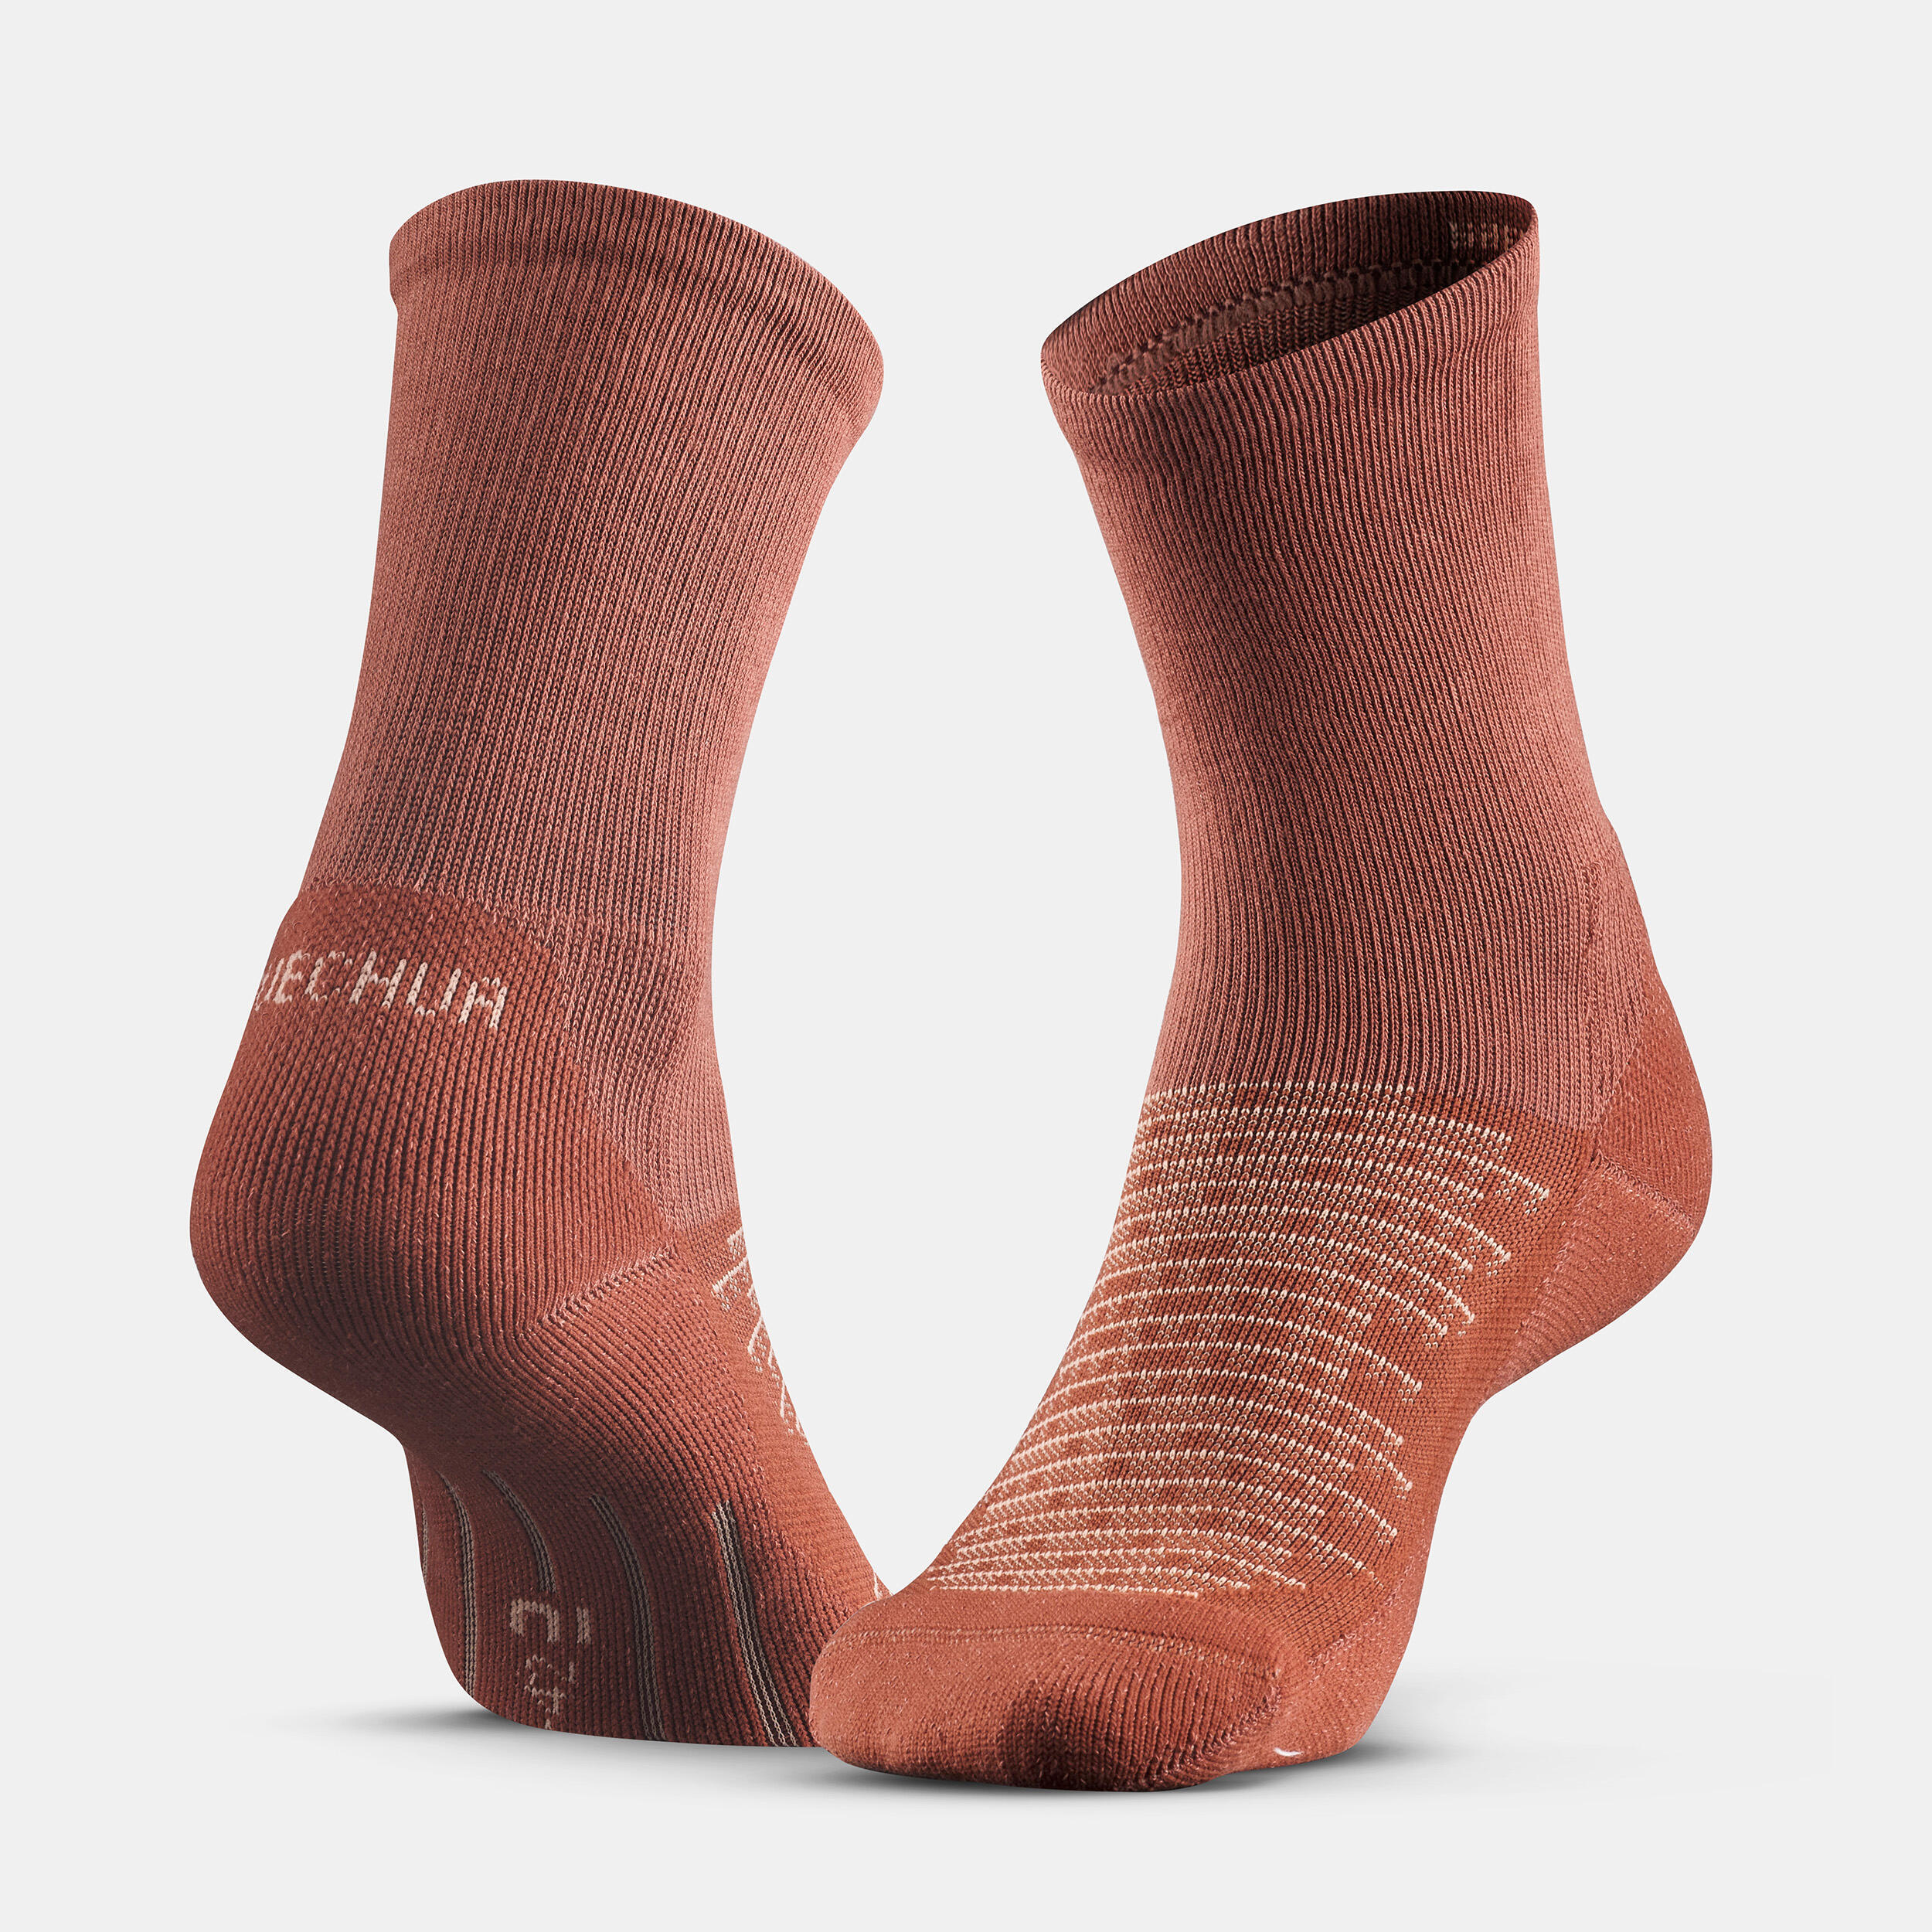 Sock Hike 100 High  - Pack of 2 Pairs - Linen and Terracotta 3/7